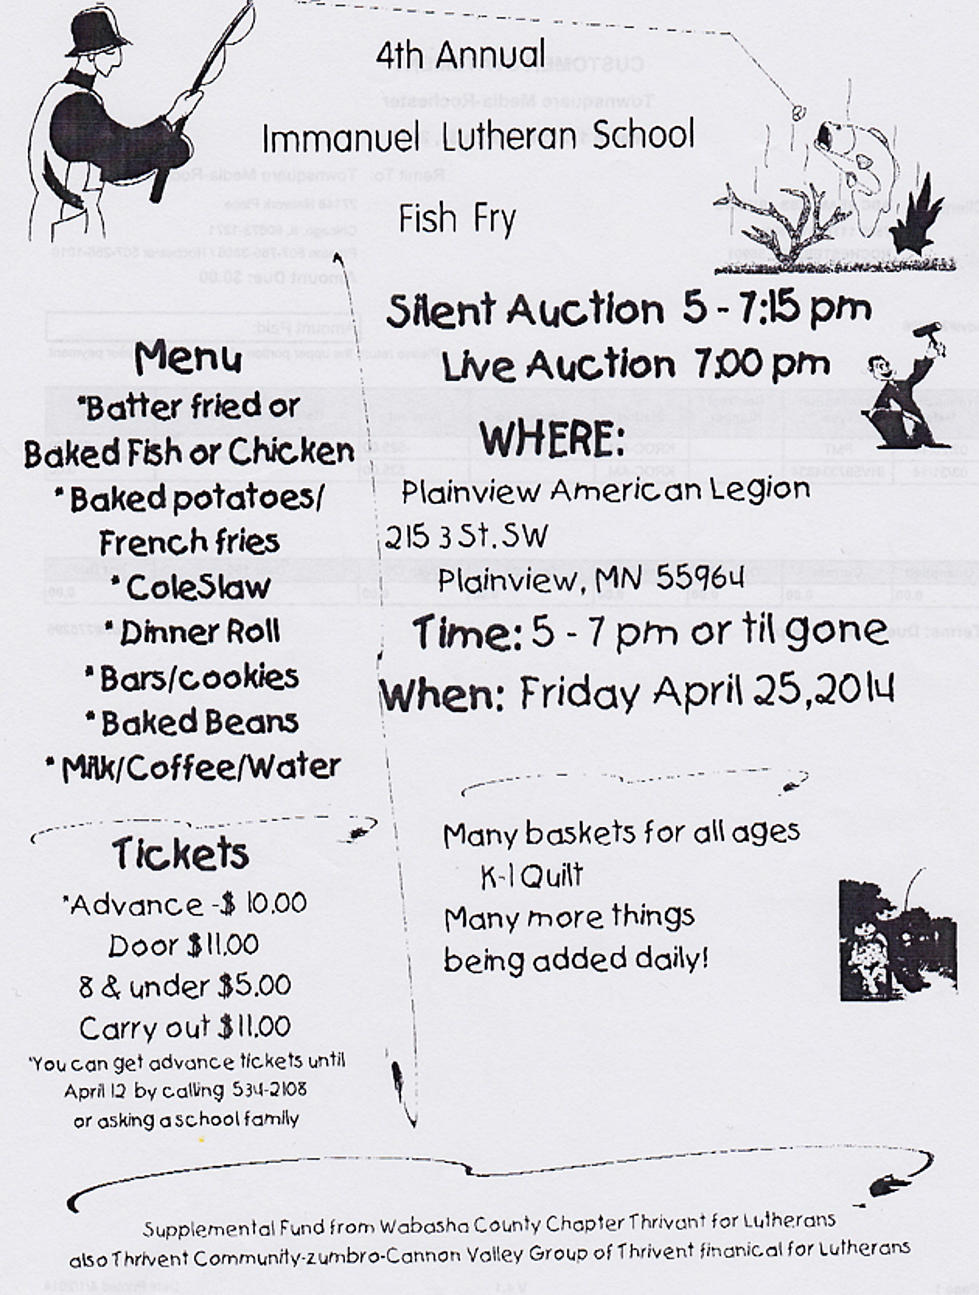 4th Annual Immanuel Lutheran School Fish Fry / Silent Auction